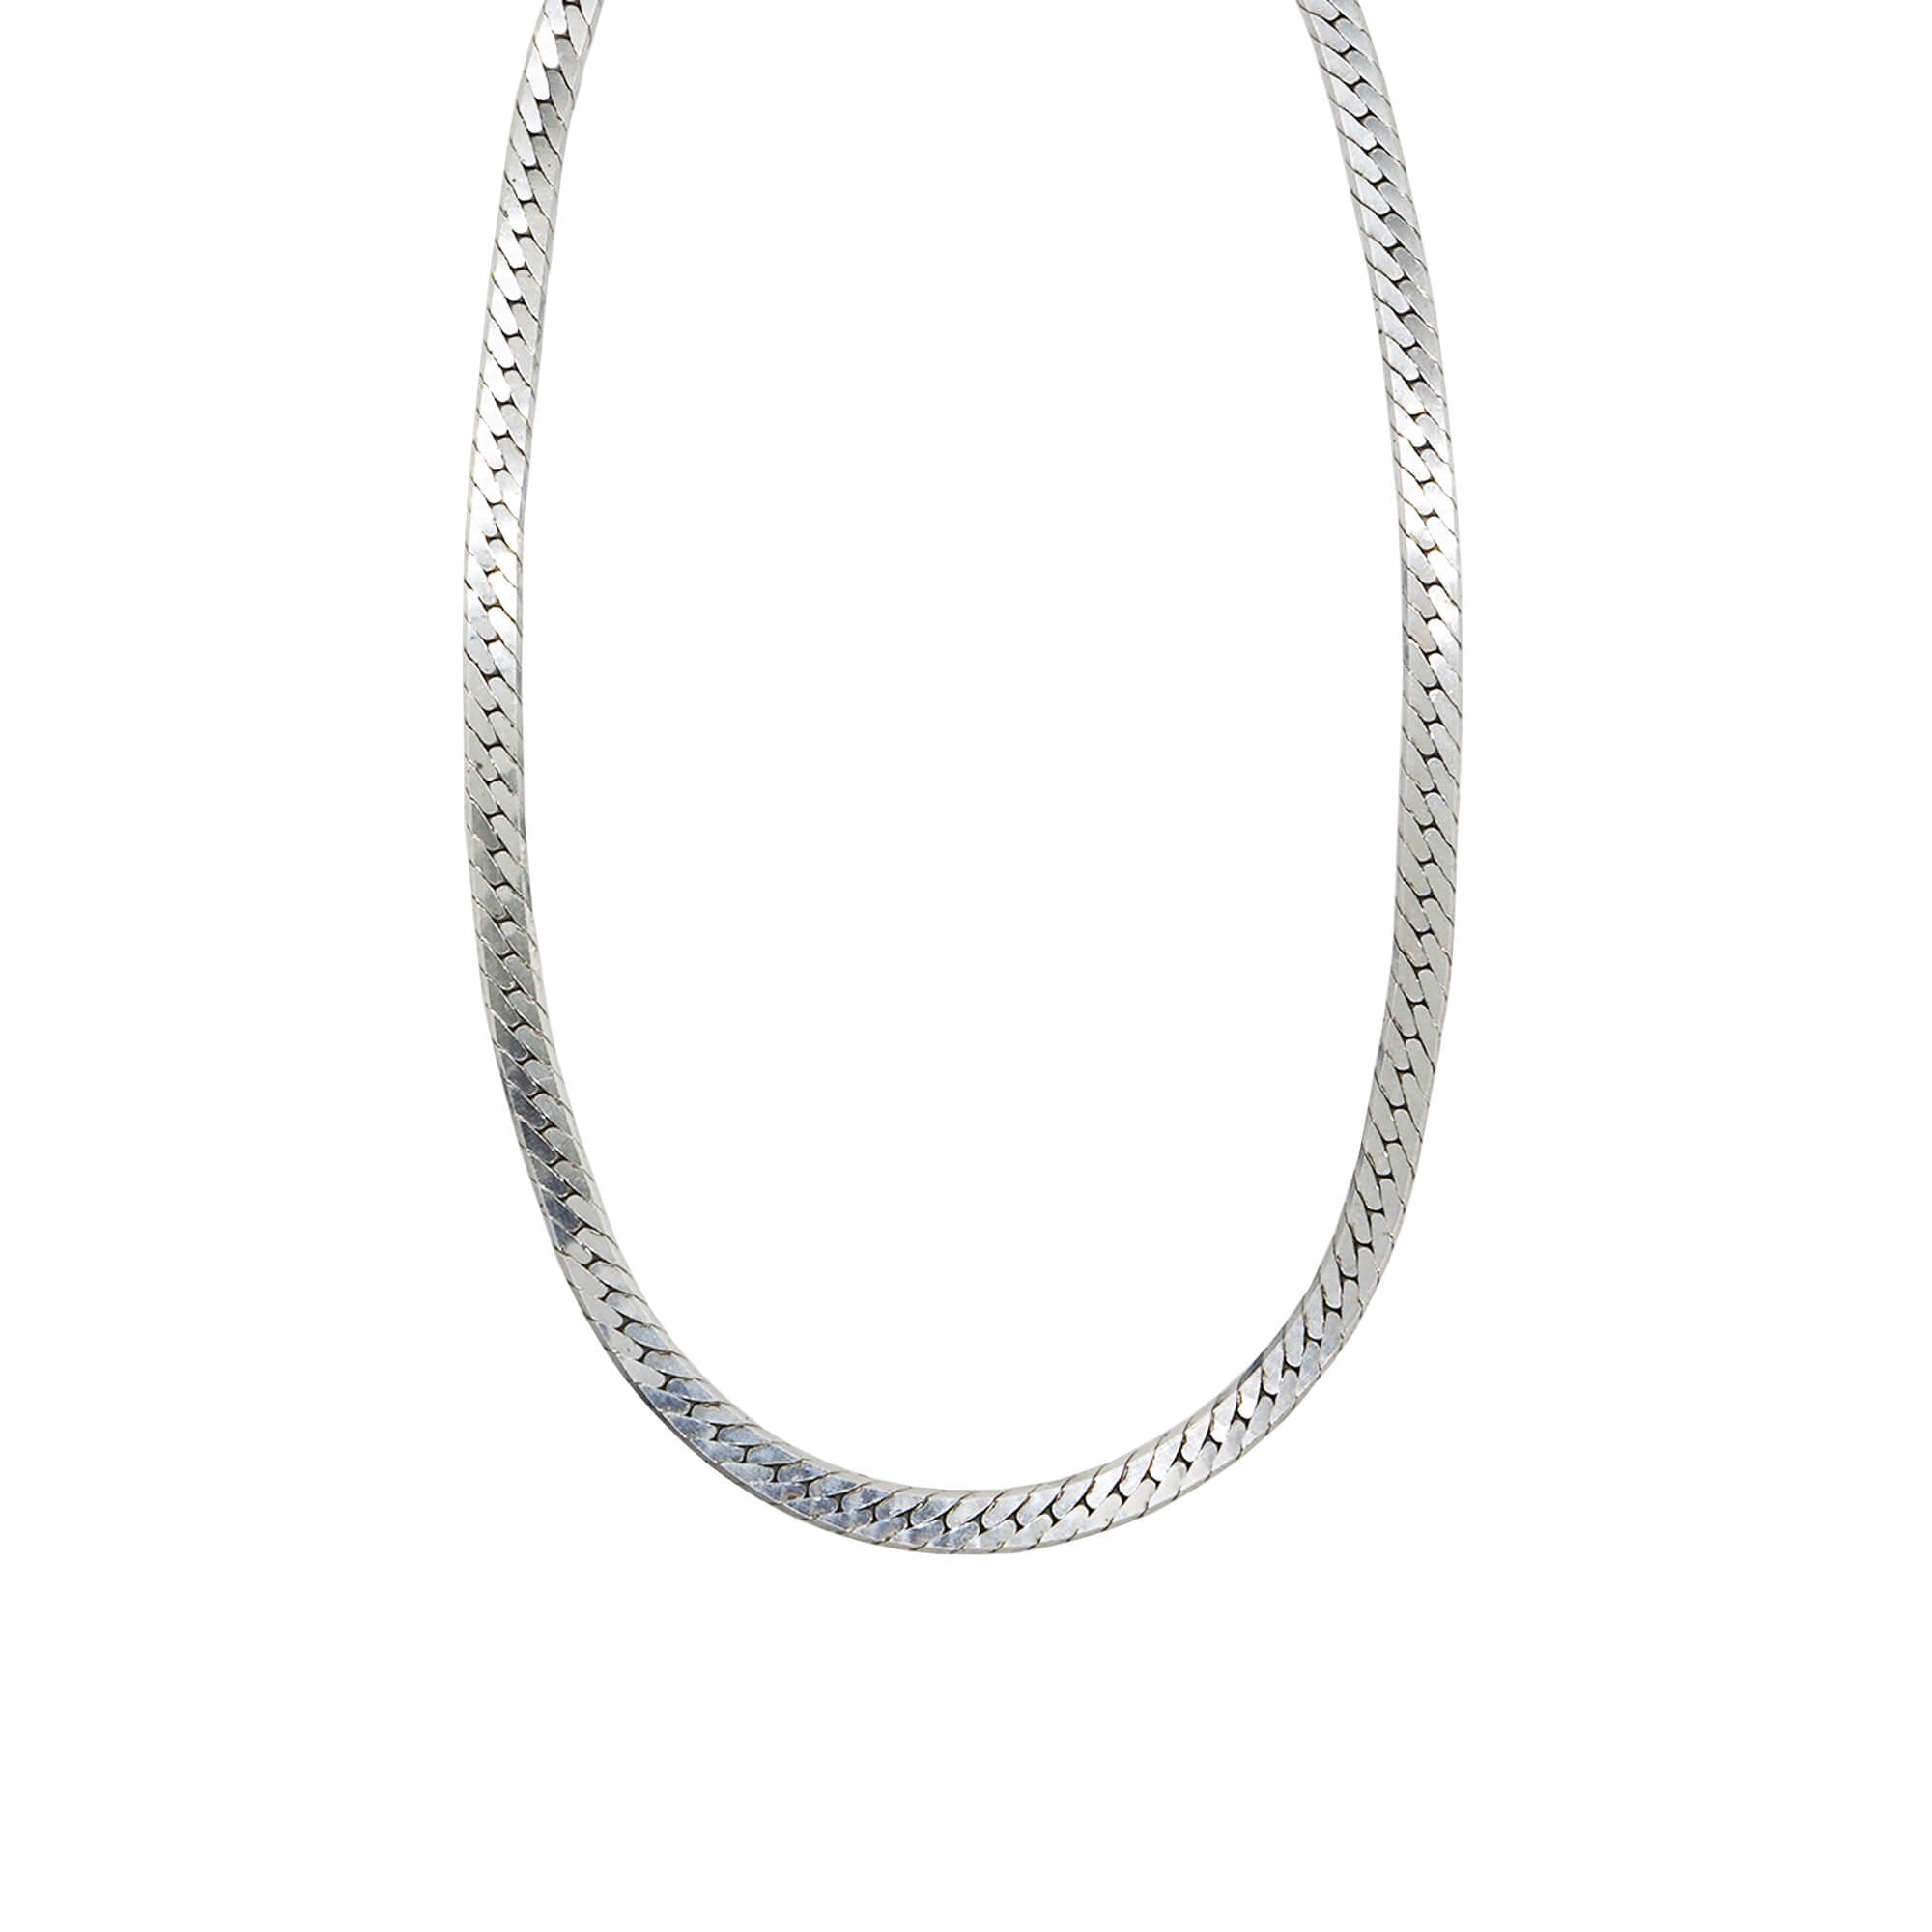 VINTAGE STERLING SILVER HERRINGBONE CHAIN NECKLACE – PAWNSHOP